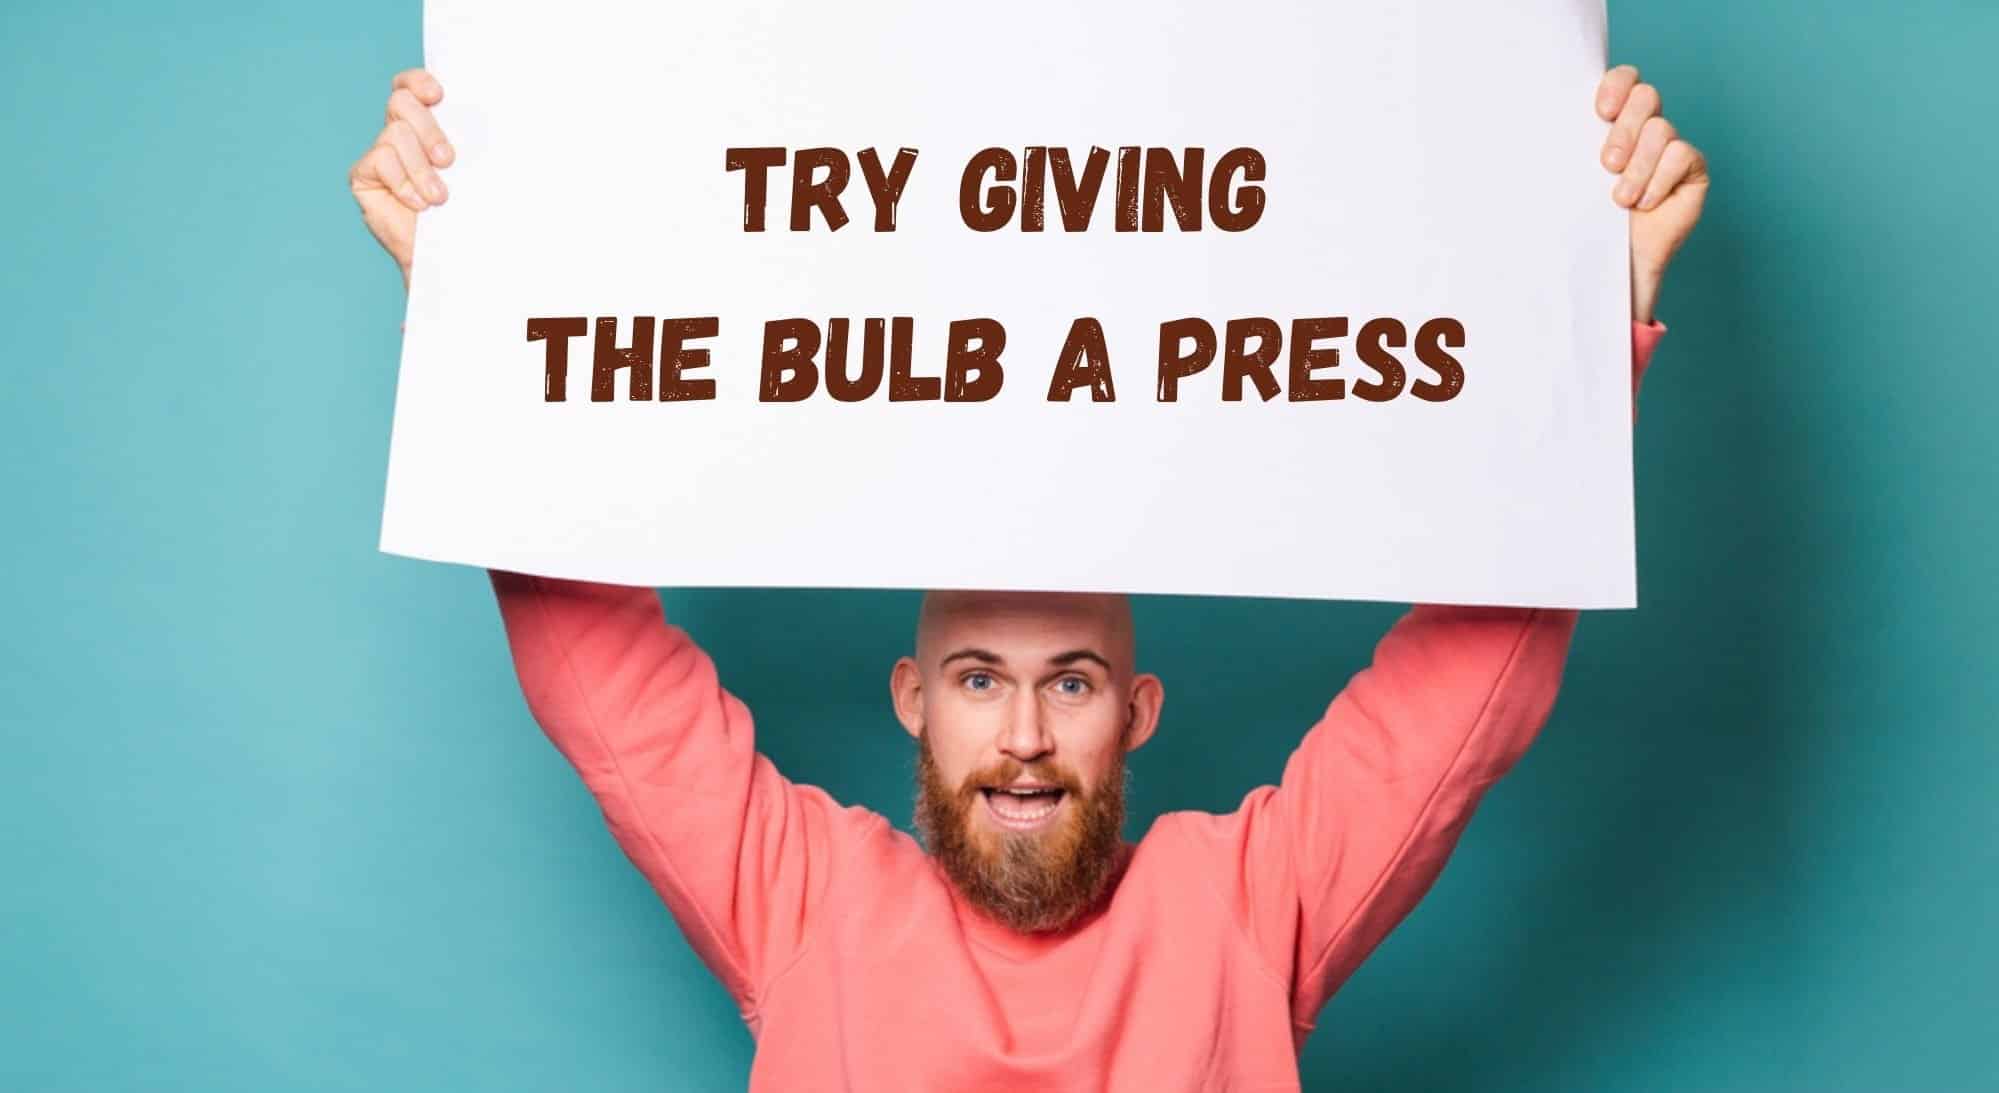 Try giving the bulb a press